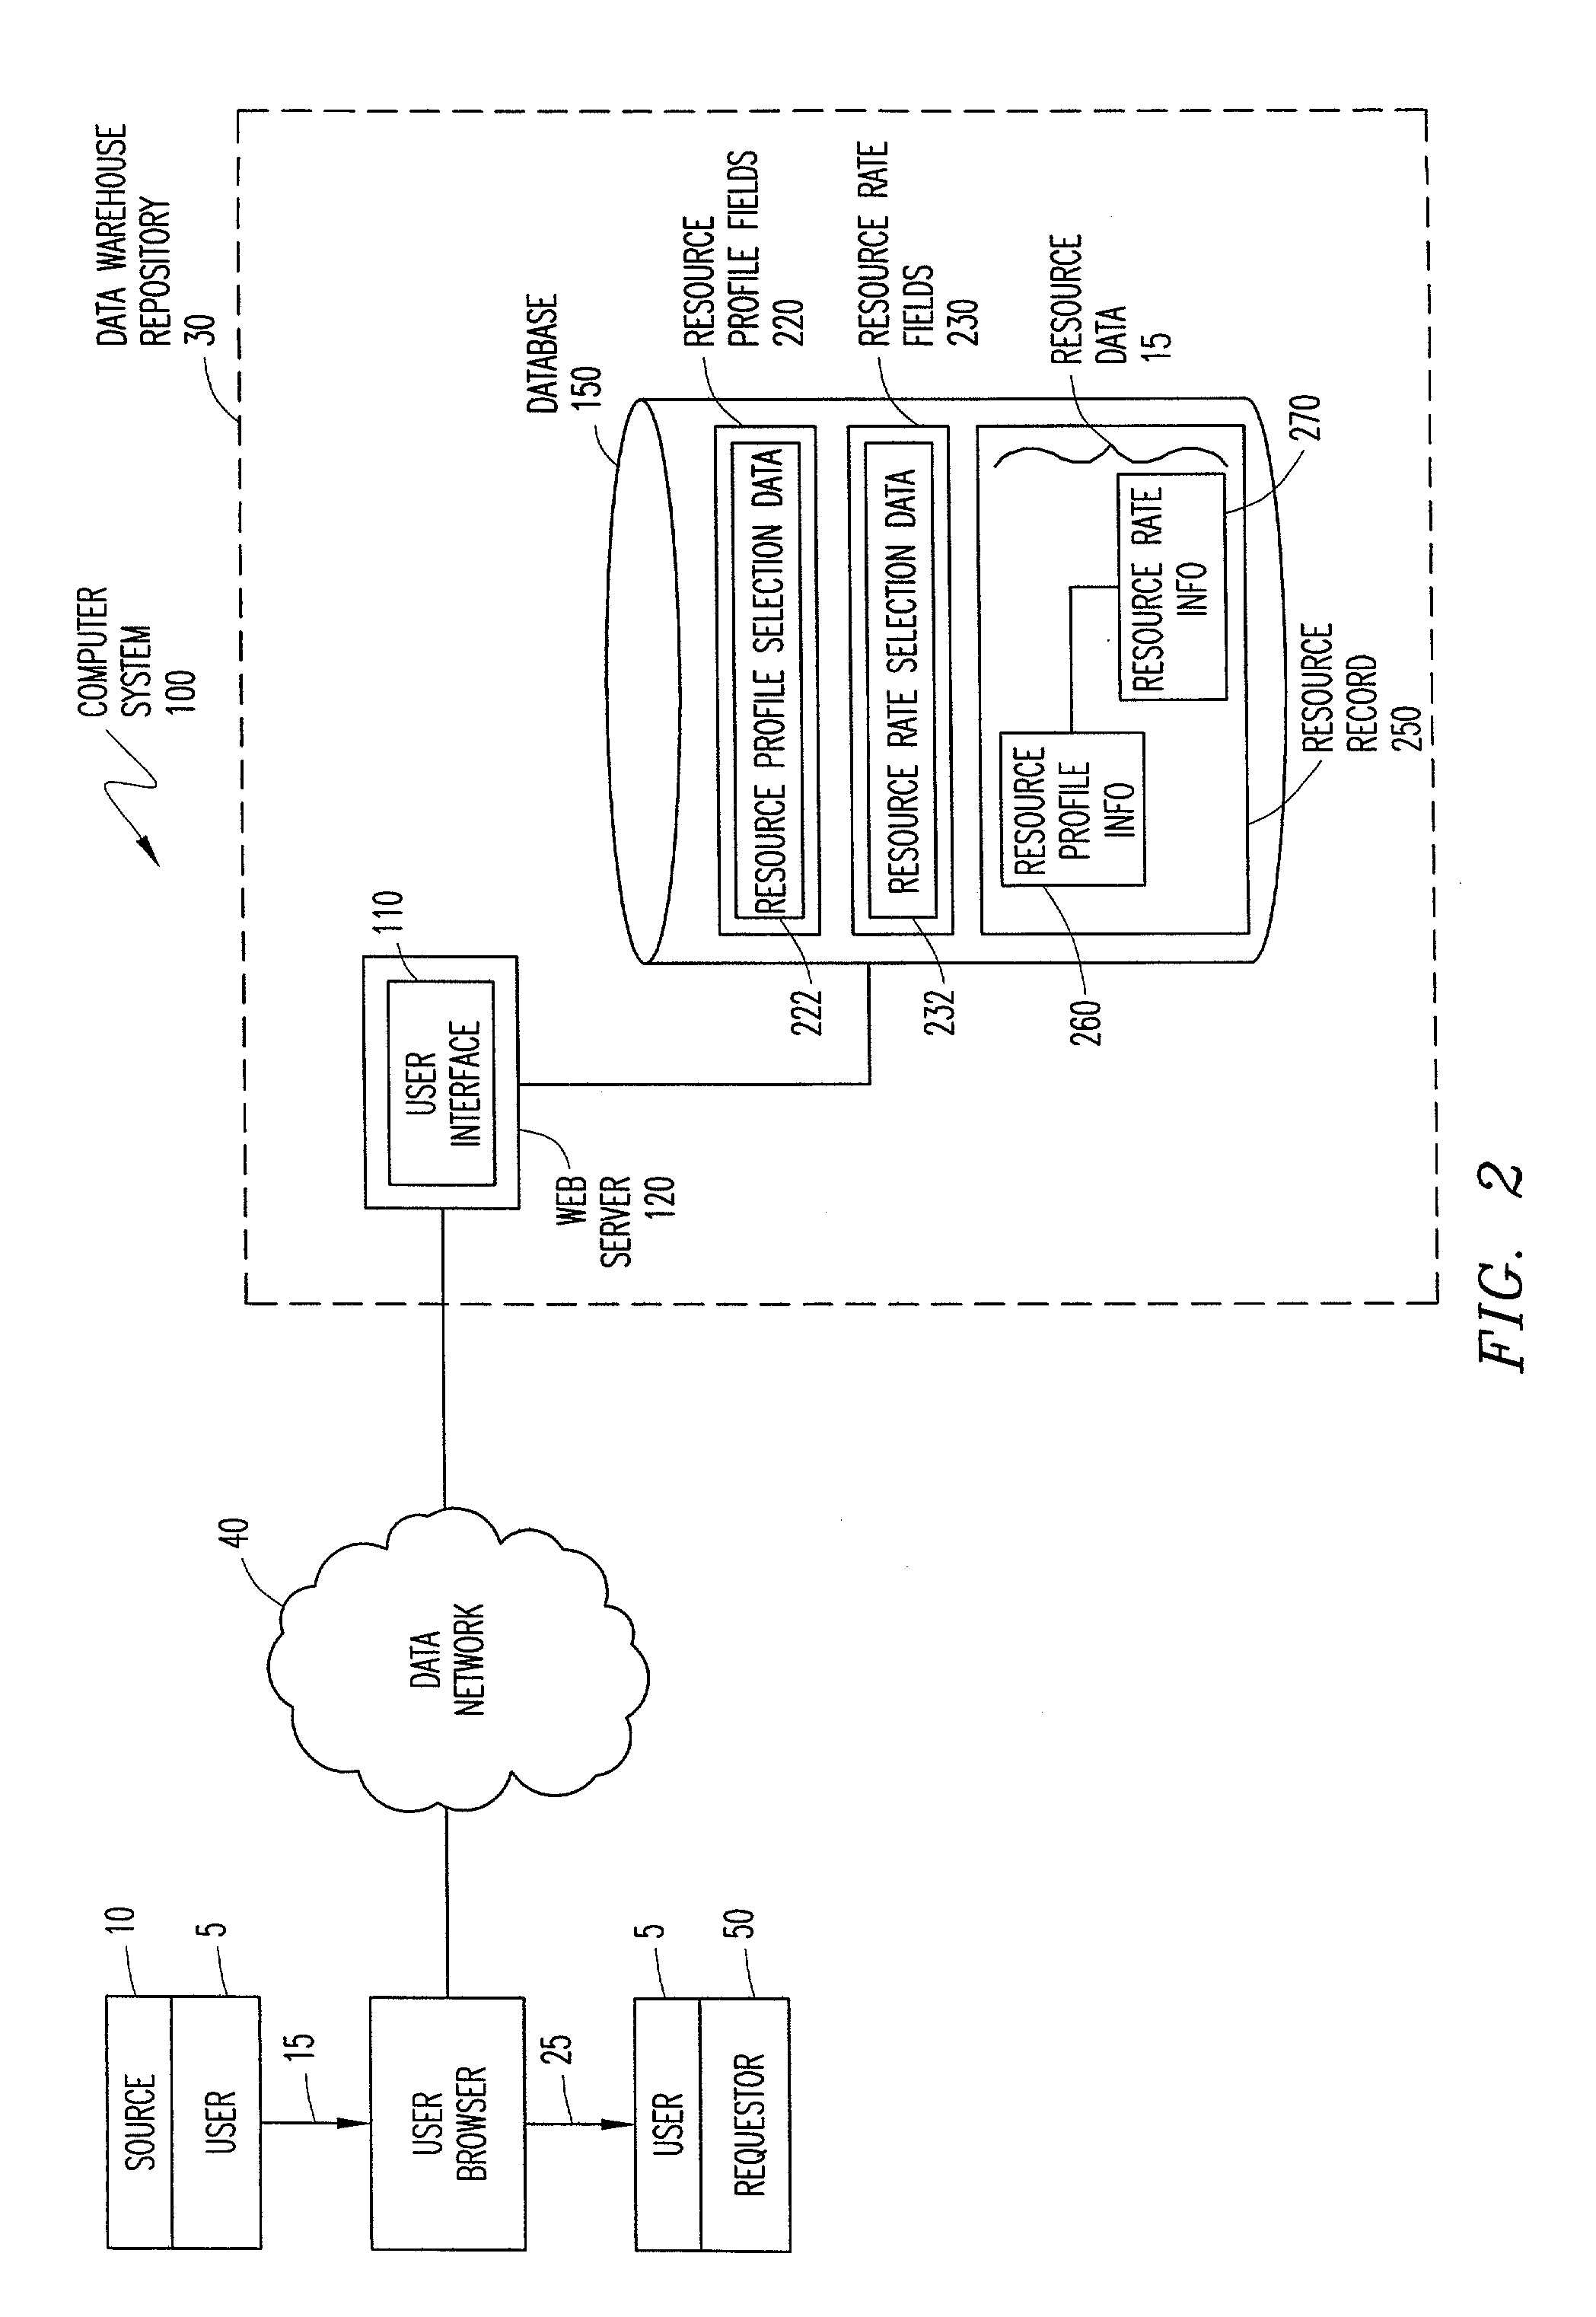 System and method for collecting and providing resource rate information using resource profiling